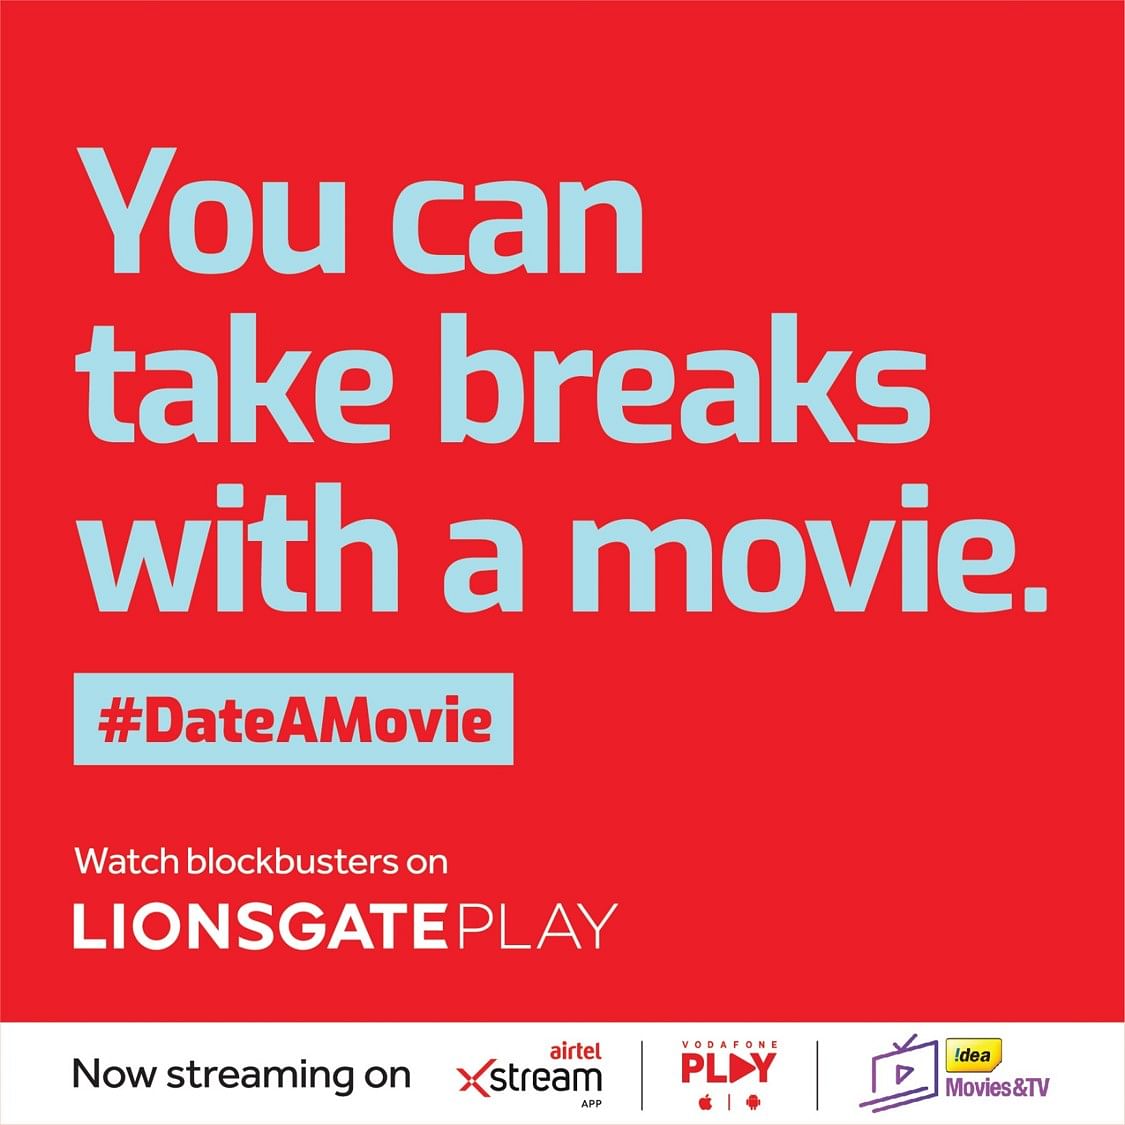 Lionsgate Play launches Valentine’s Day campaign, #DateAMovie